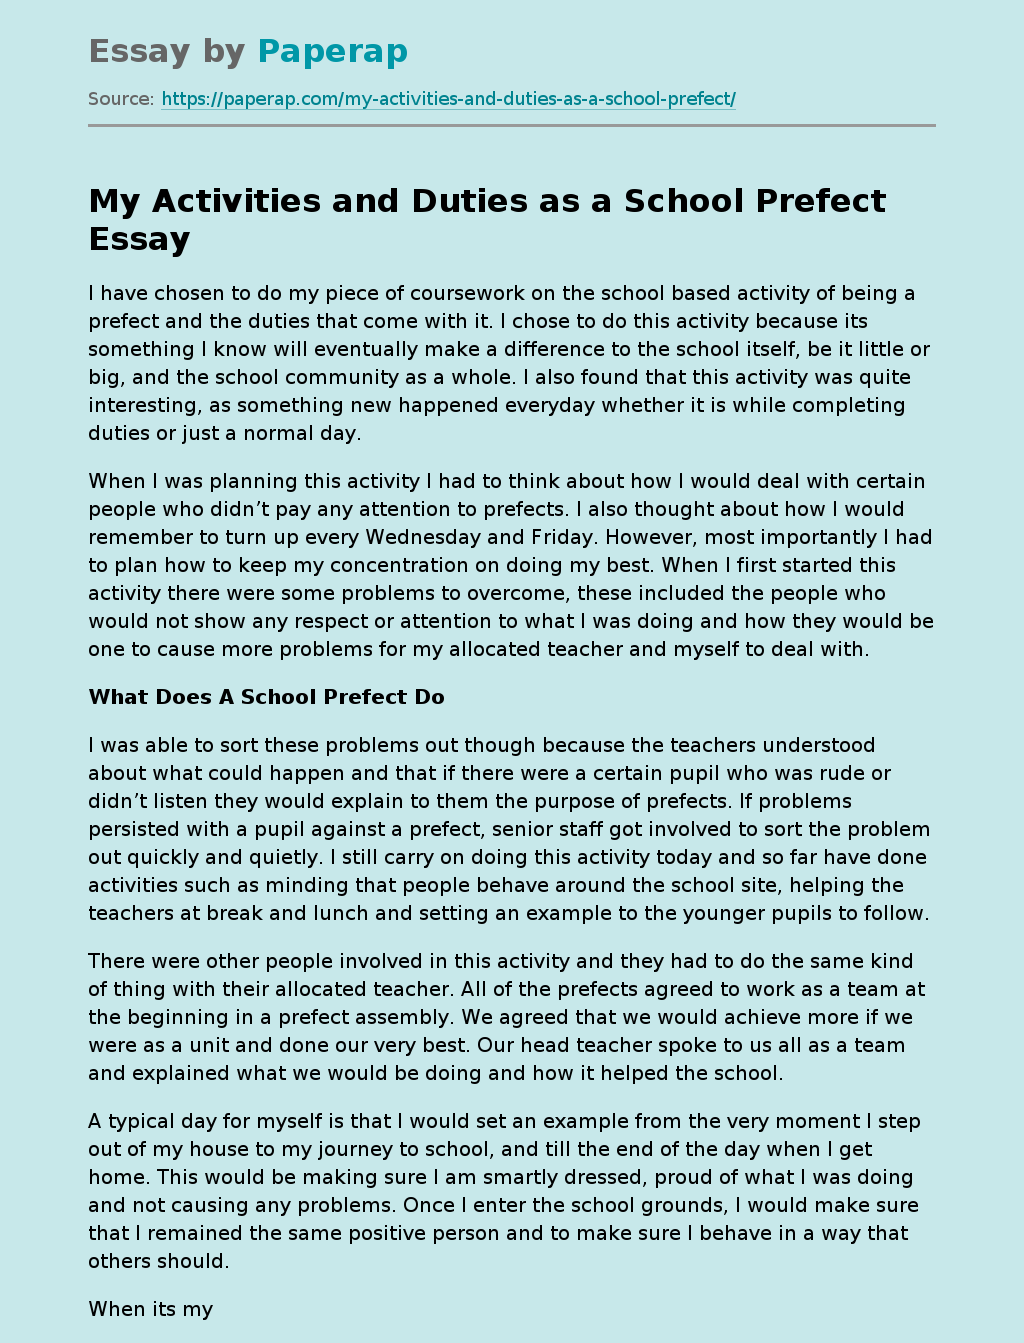 My Activities and Duties as a School Prefect